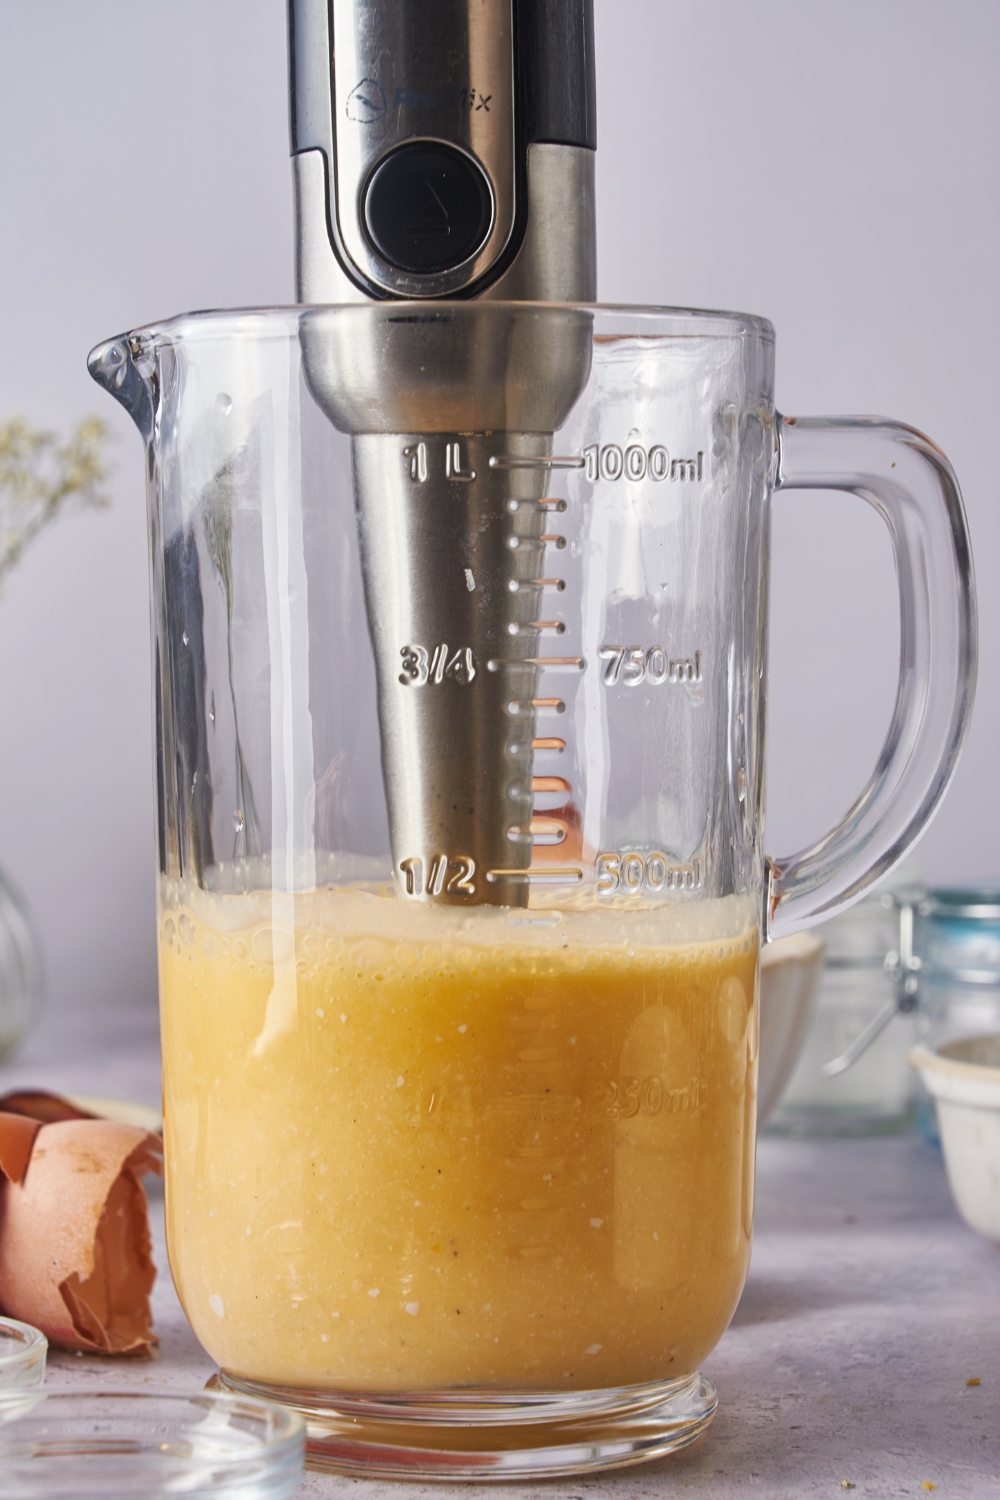 A pitcher with a mix of eggs and cheese being blended by an emersion blender.